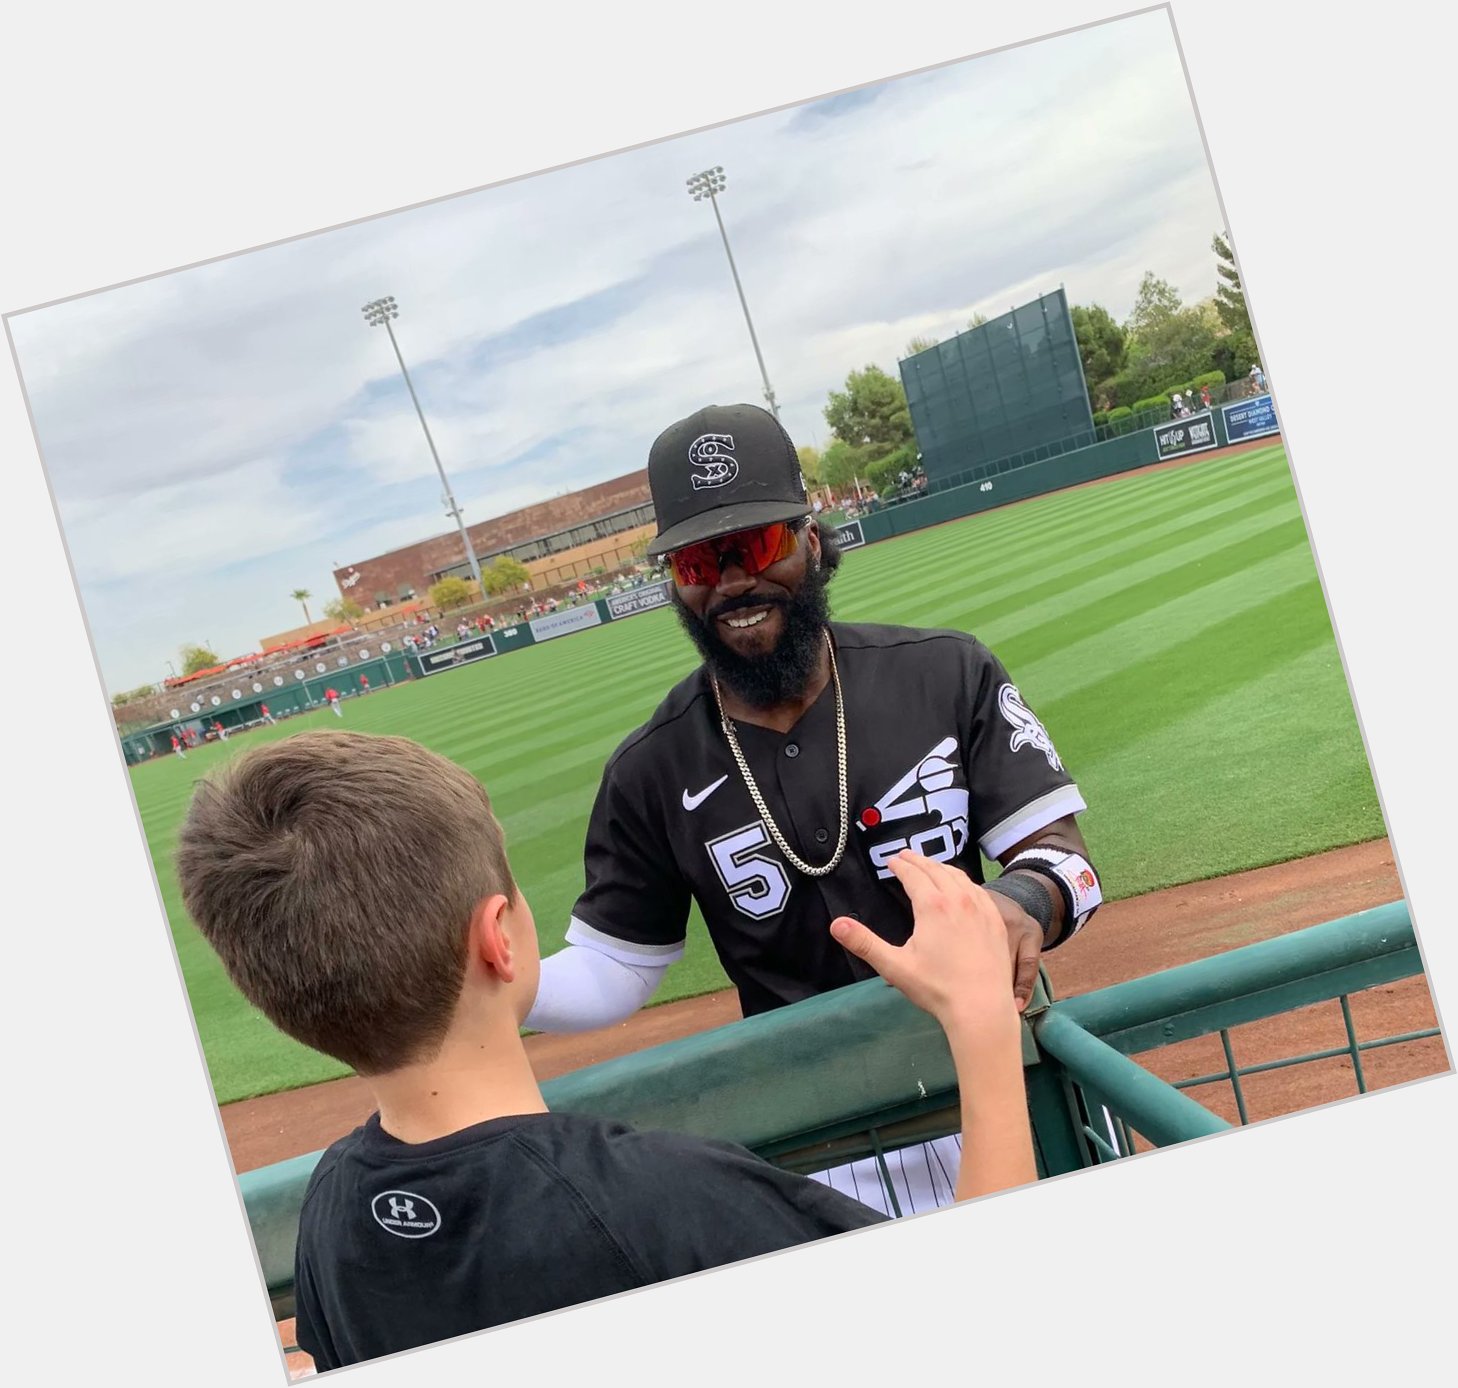 Happy Birthday to the White Sox Josh Harrison. Born on this date in 1987.  